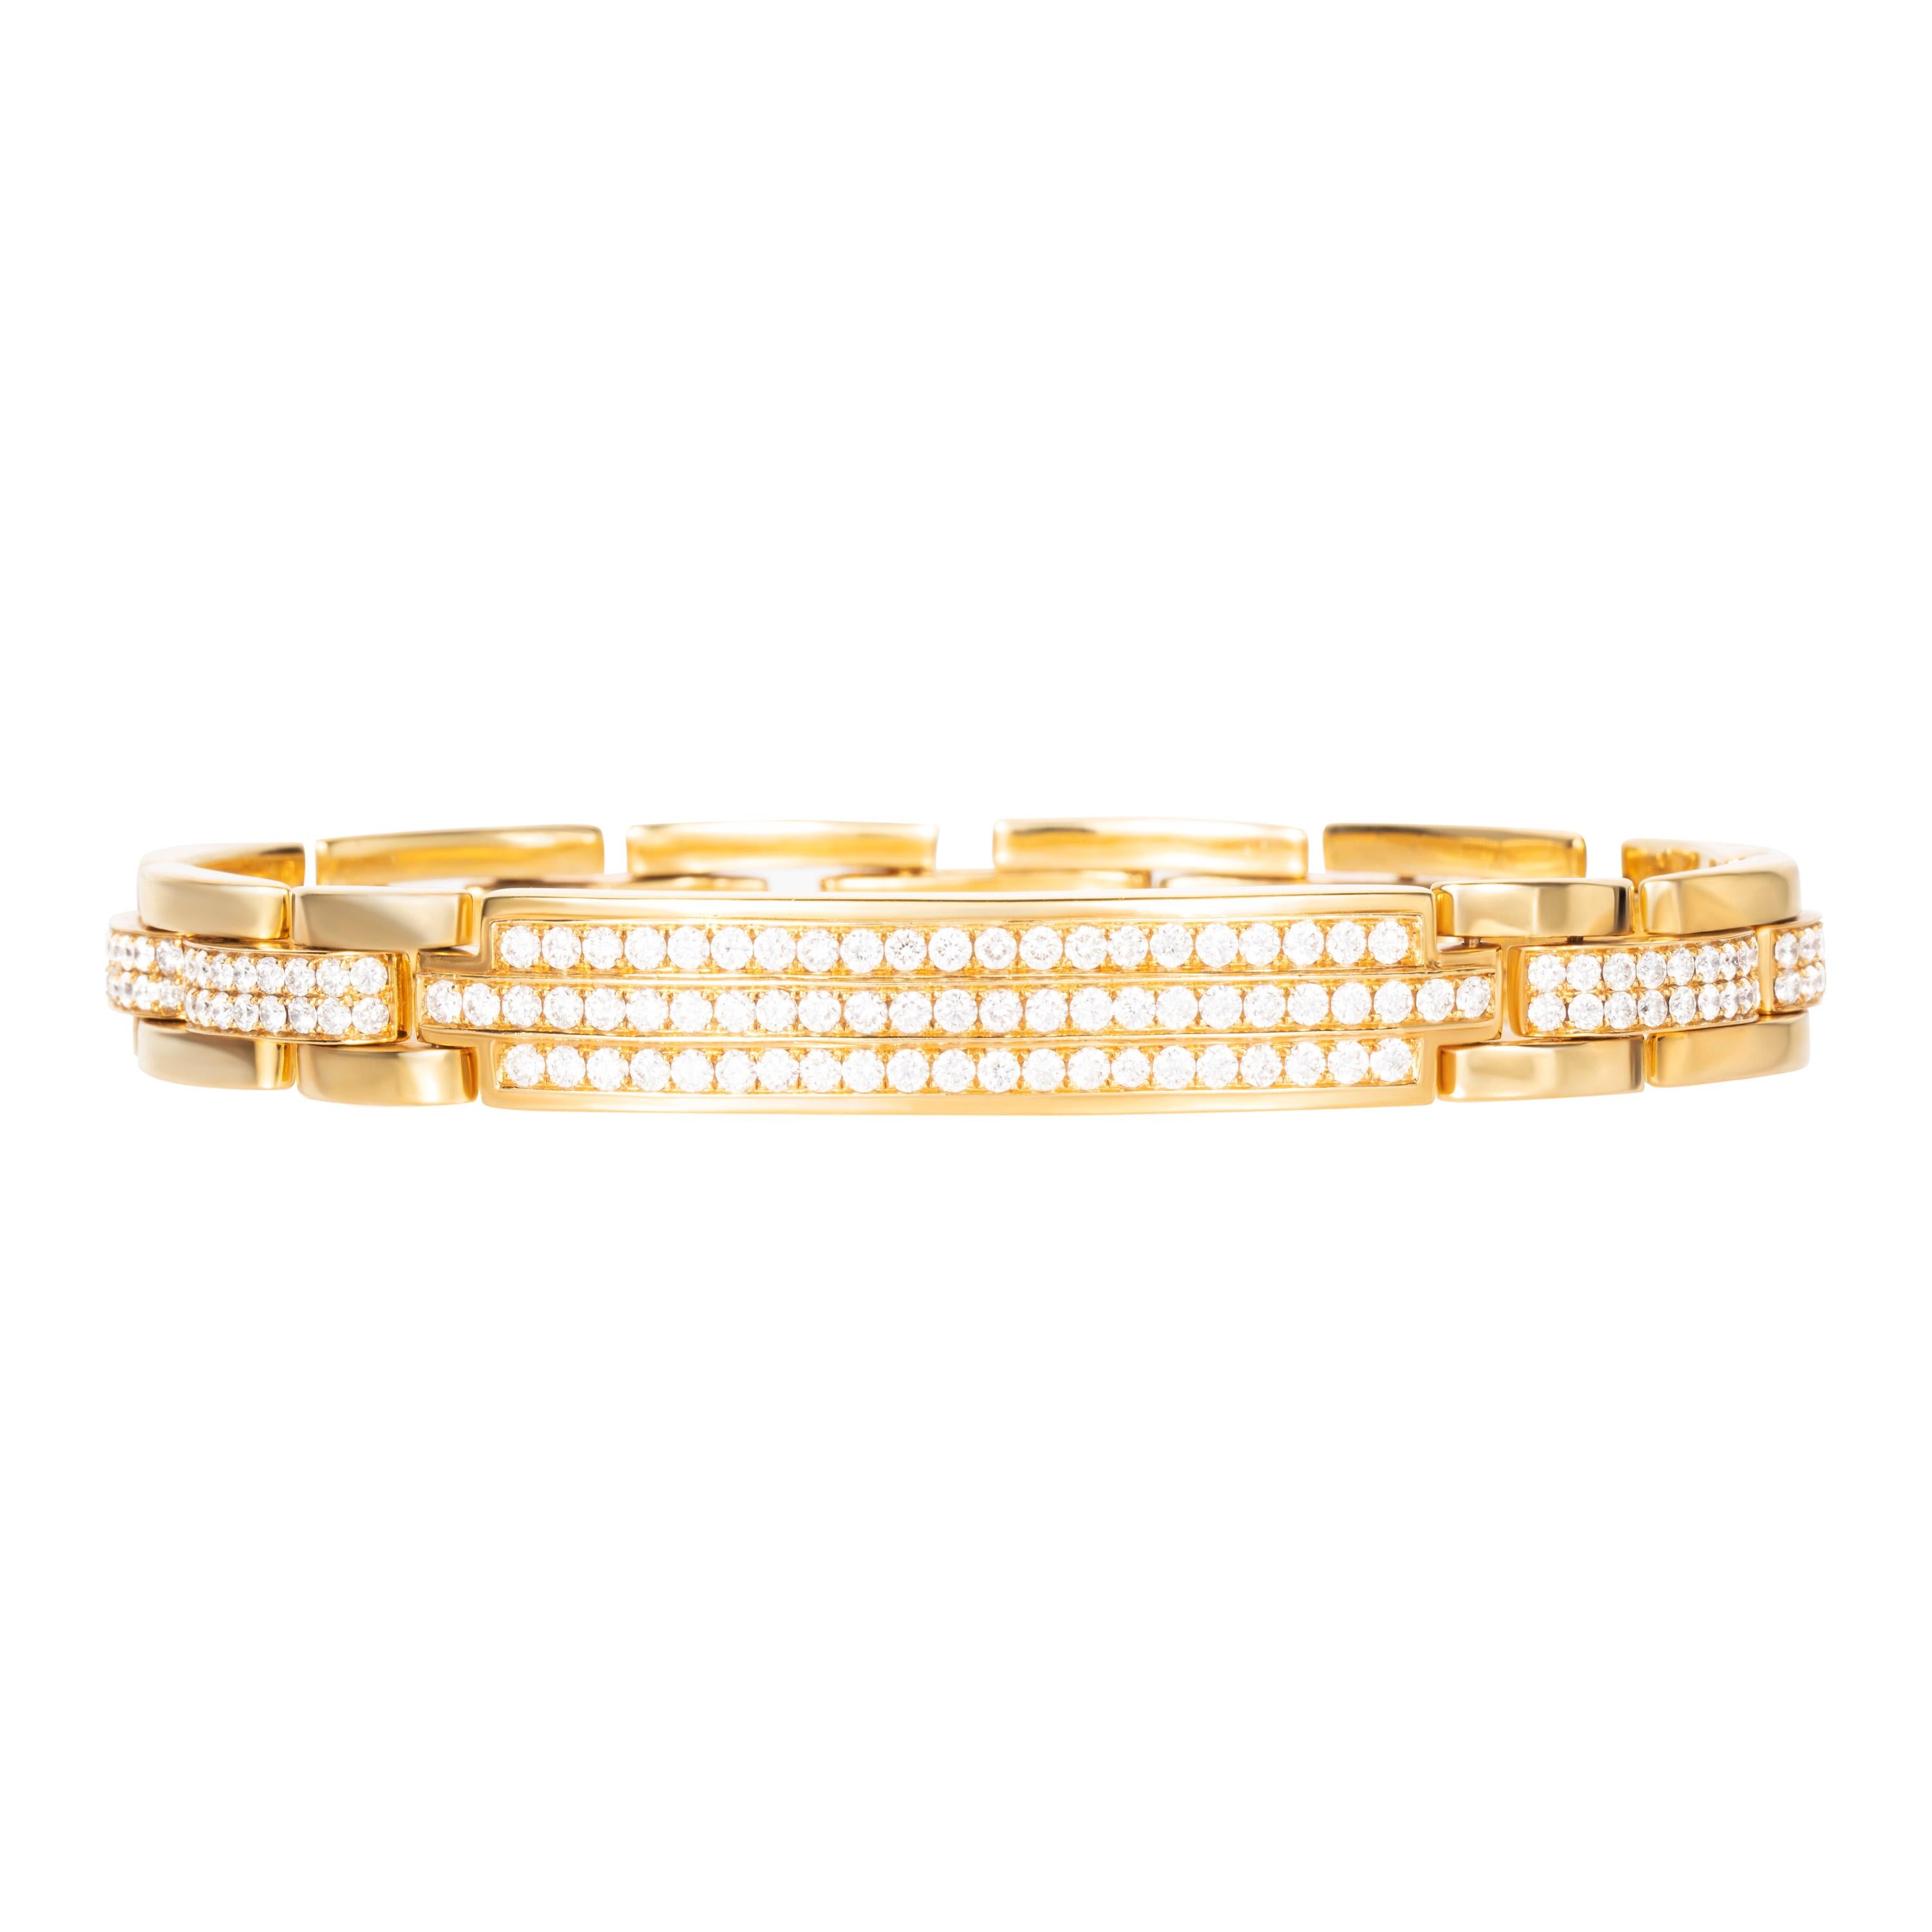 Sparkling round diamond link bracelet with 4.85 carats of brilliant cut round diamonds set in 18-karat yellow gold.  Great for stacking with other bracelets.  Length: 8 inches.

Composition:
18K Yellow Gold
245 Round Diamonds: 4.85 carats
Diamond